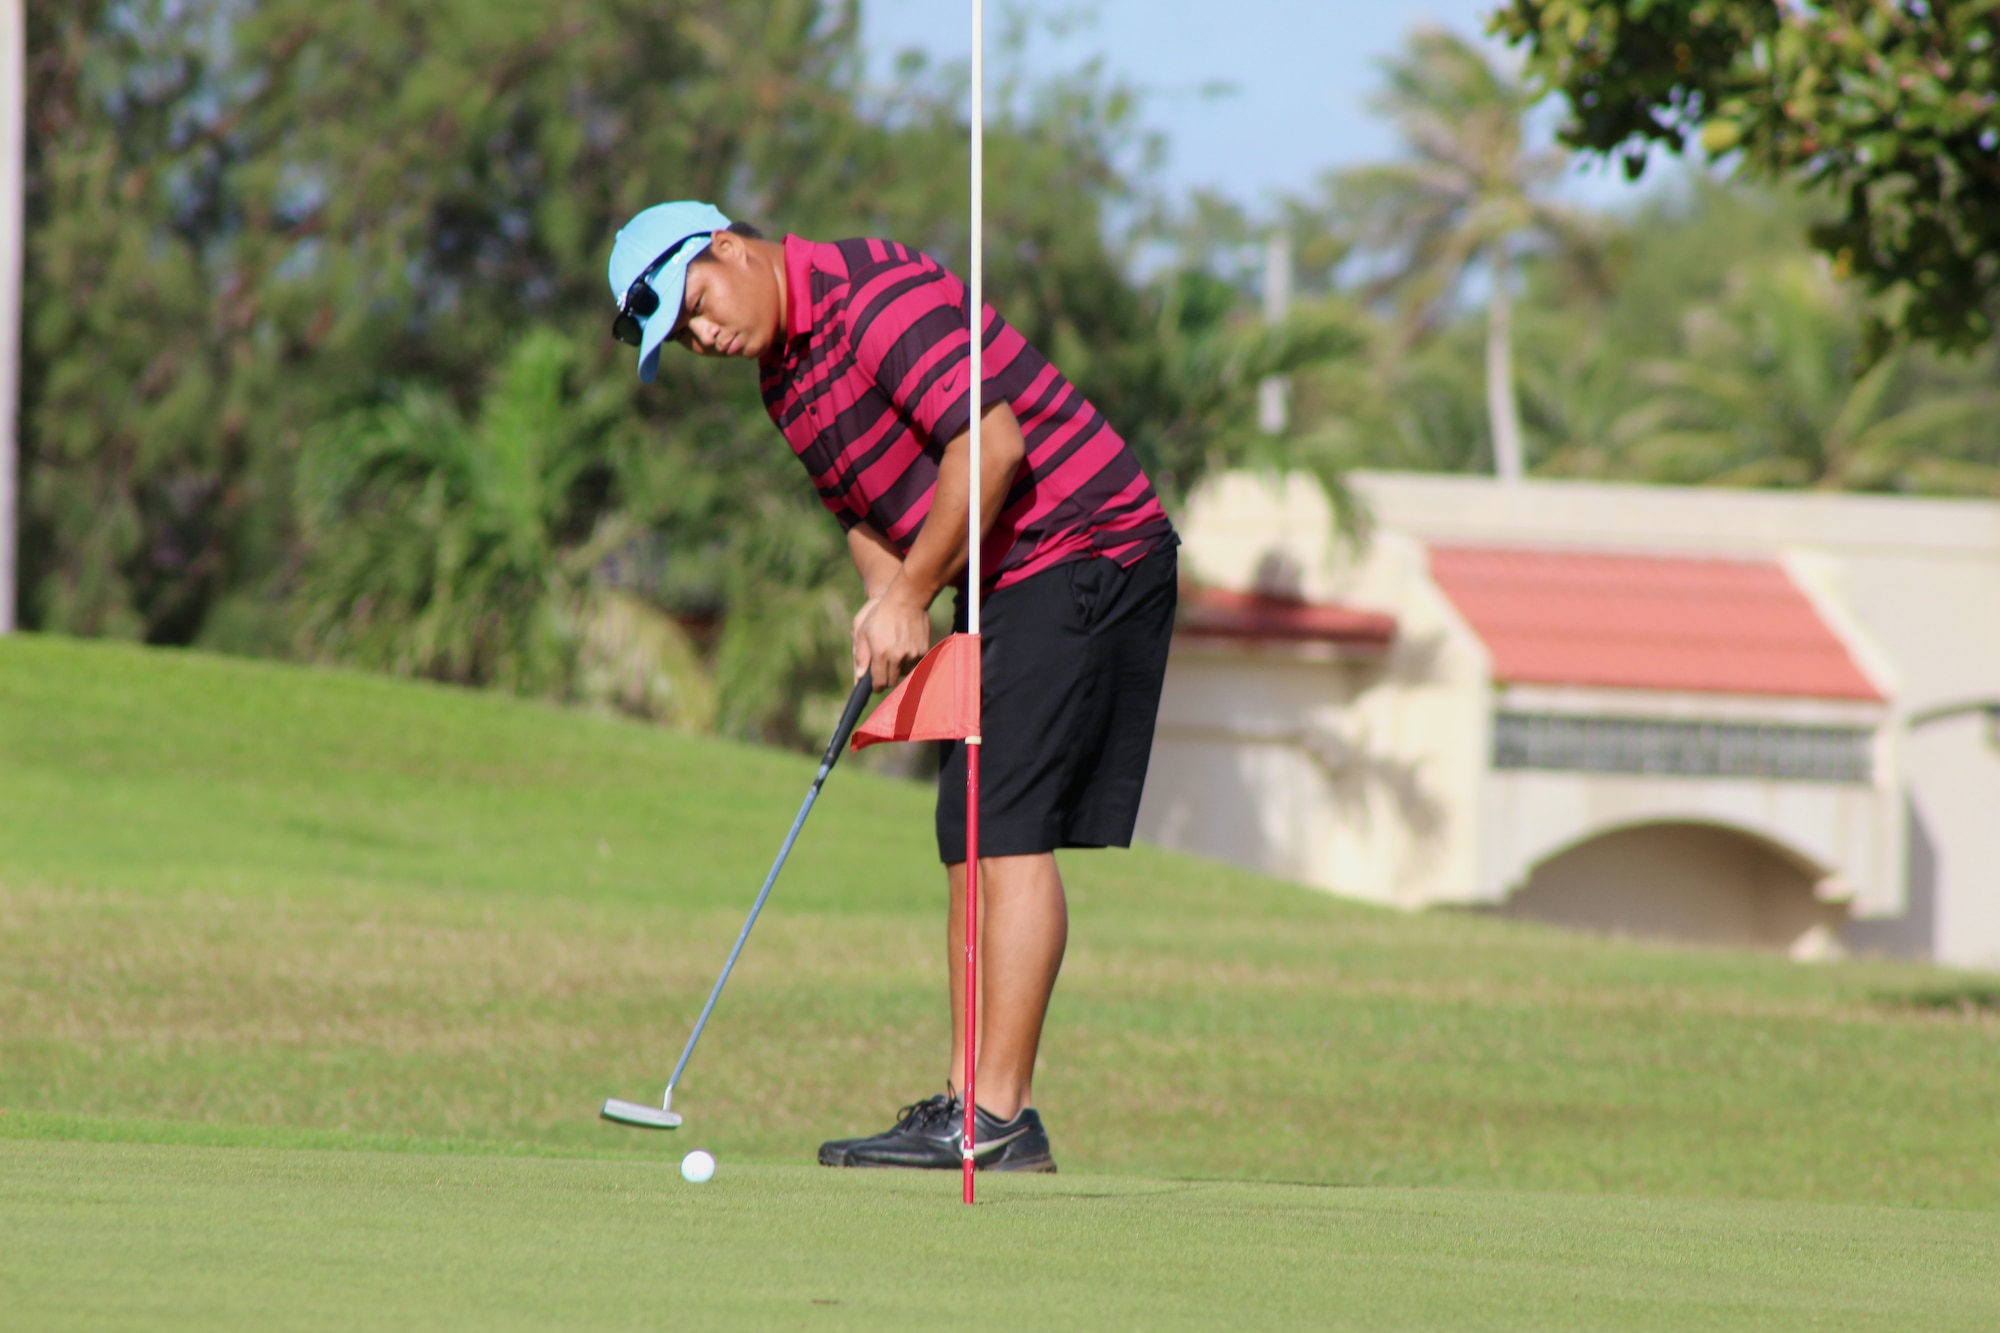 A Team Andersen golfer focuses on his put Jan. 31, 2015, during a tournament on Andersen Air Force Base, Guam. About 60 golfers participated in a tournament and enjoyed the upgraded amenities of the new golf pro shop and its location. (U.S. Air Force photo by 1st Lt. Jessica Clark/Released) 